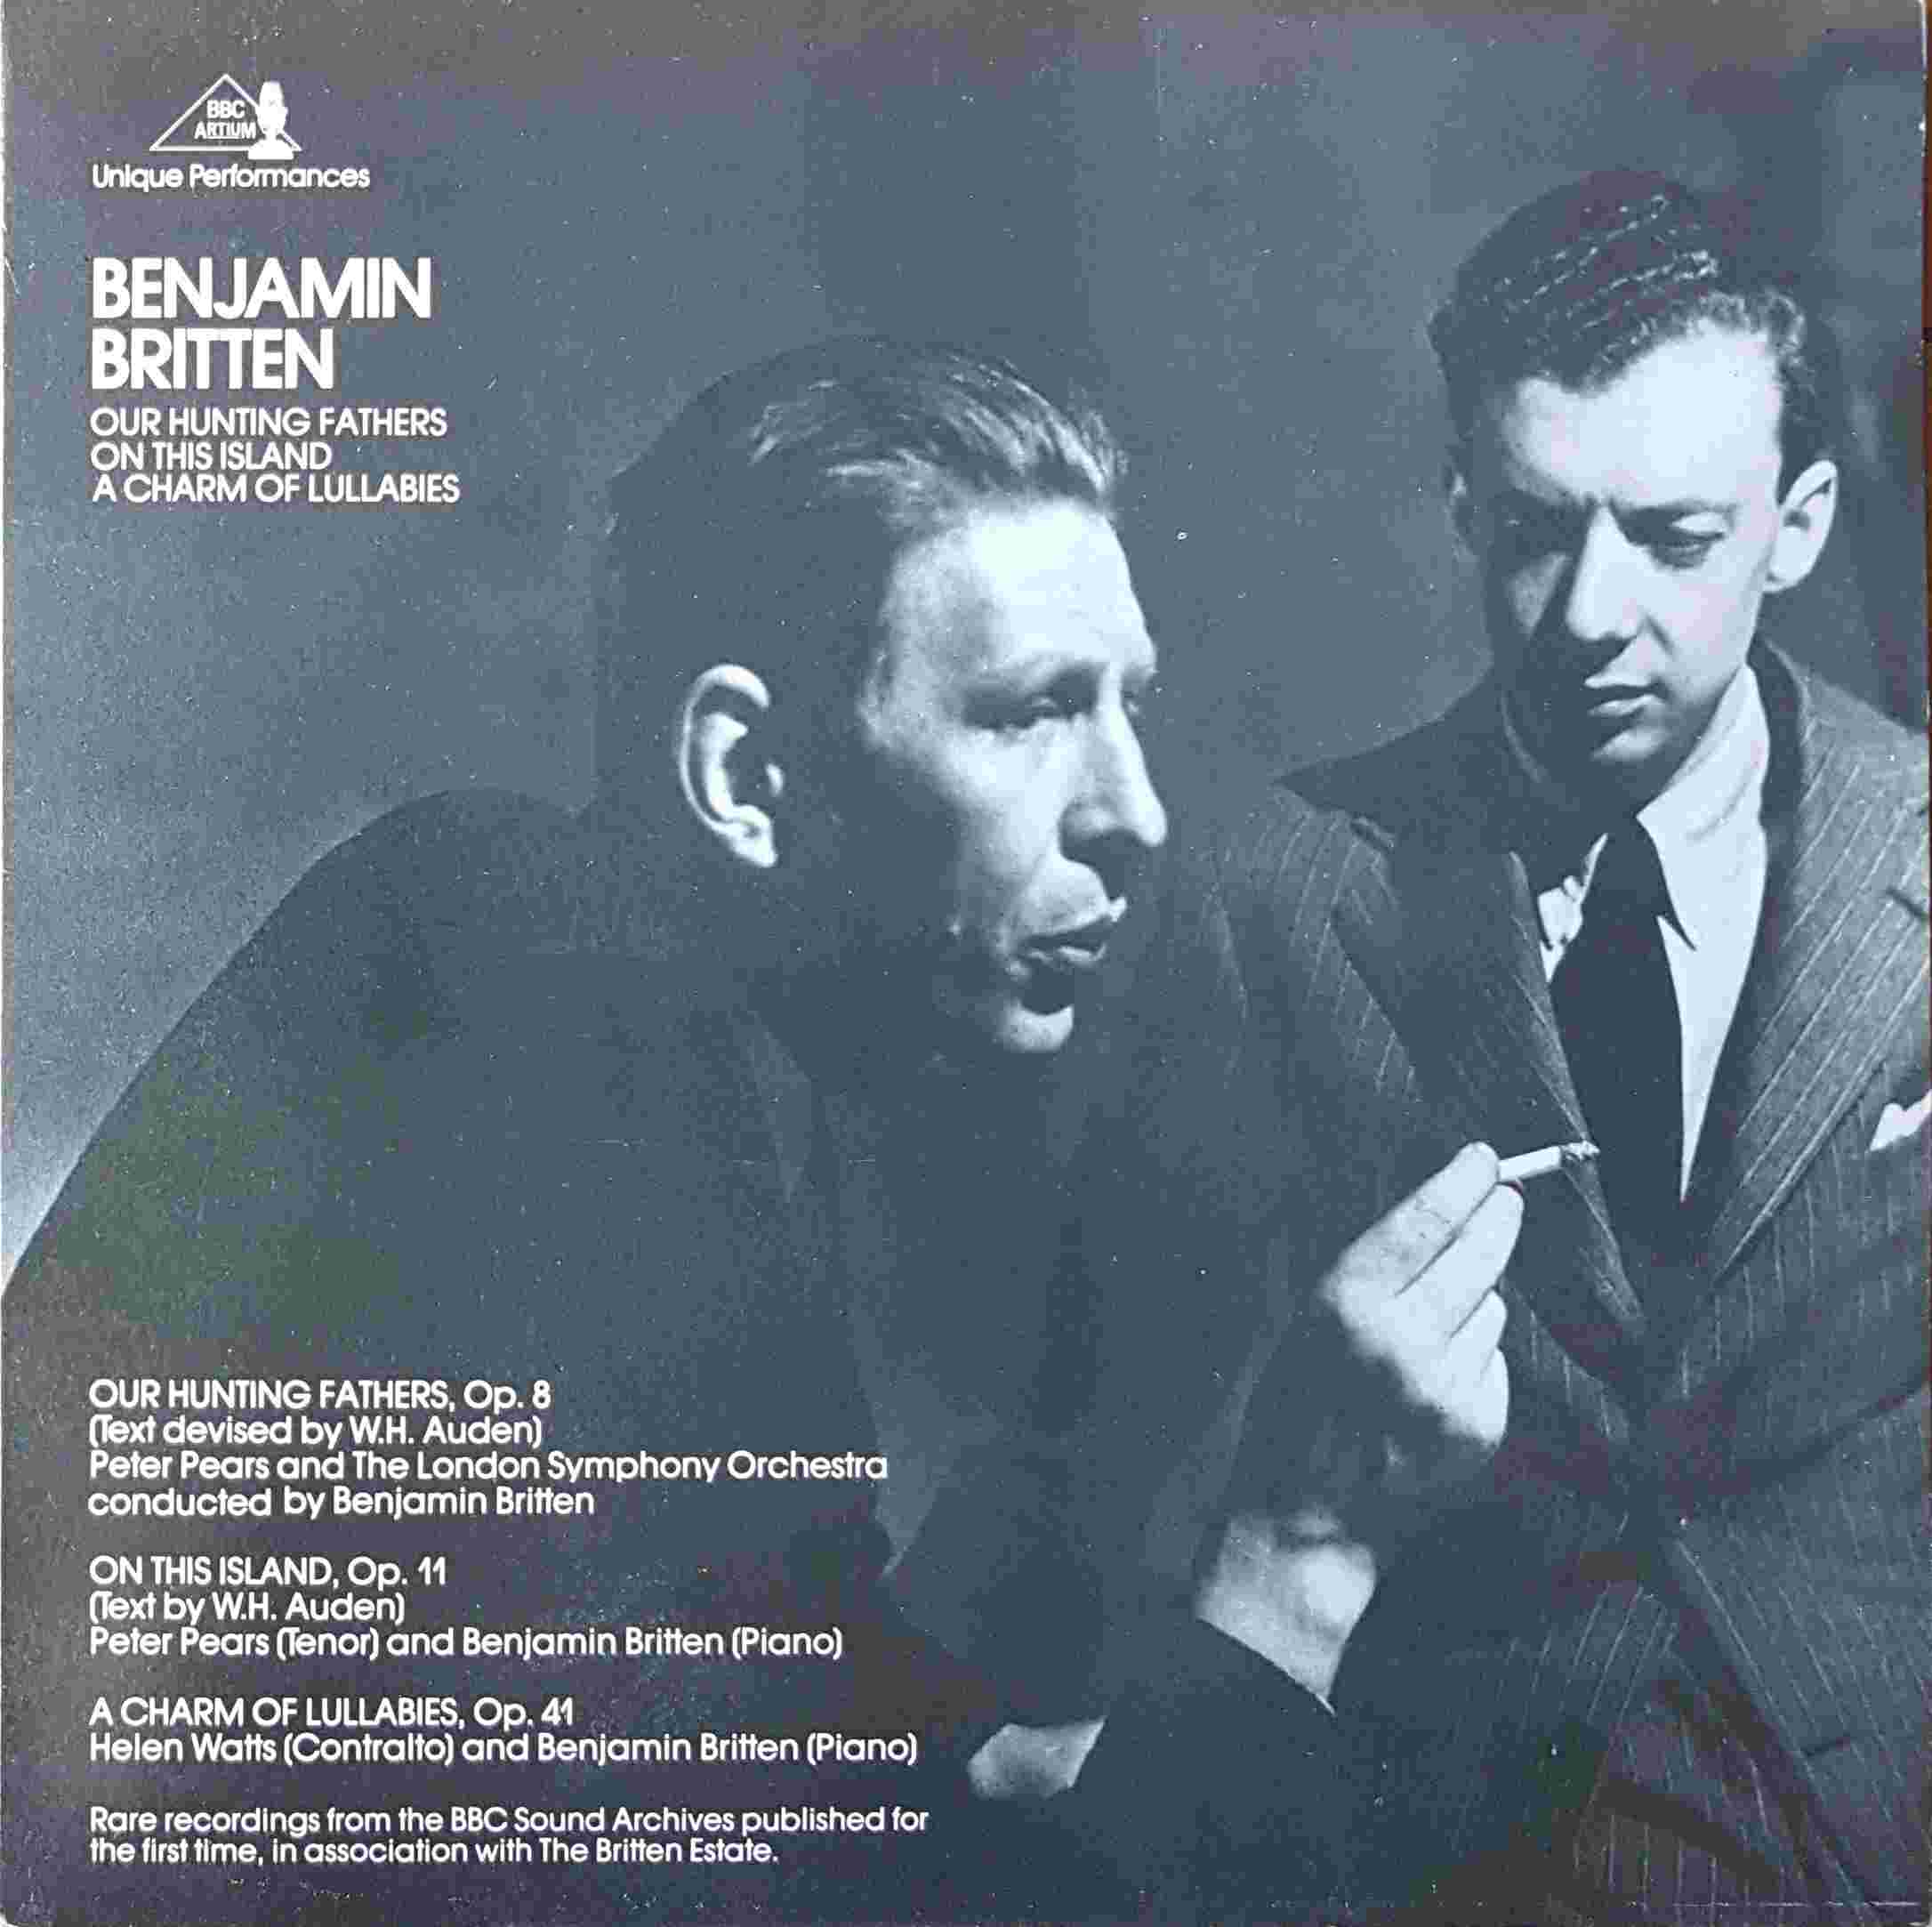 Picture of REGL 417 Benjamin Britten - Our hunting fathers by artist Benjamin Britten from the BBC albums - Records and Tapes library